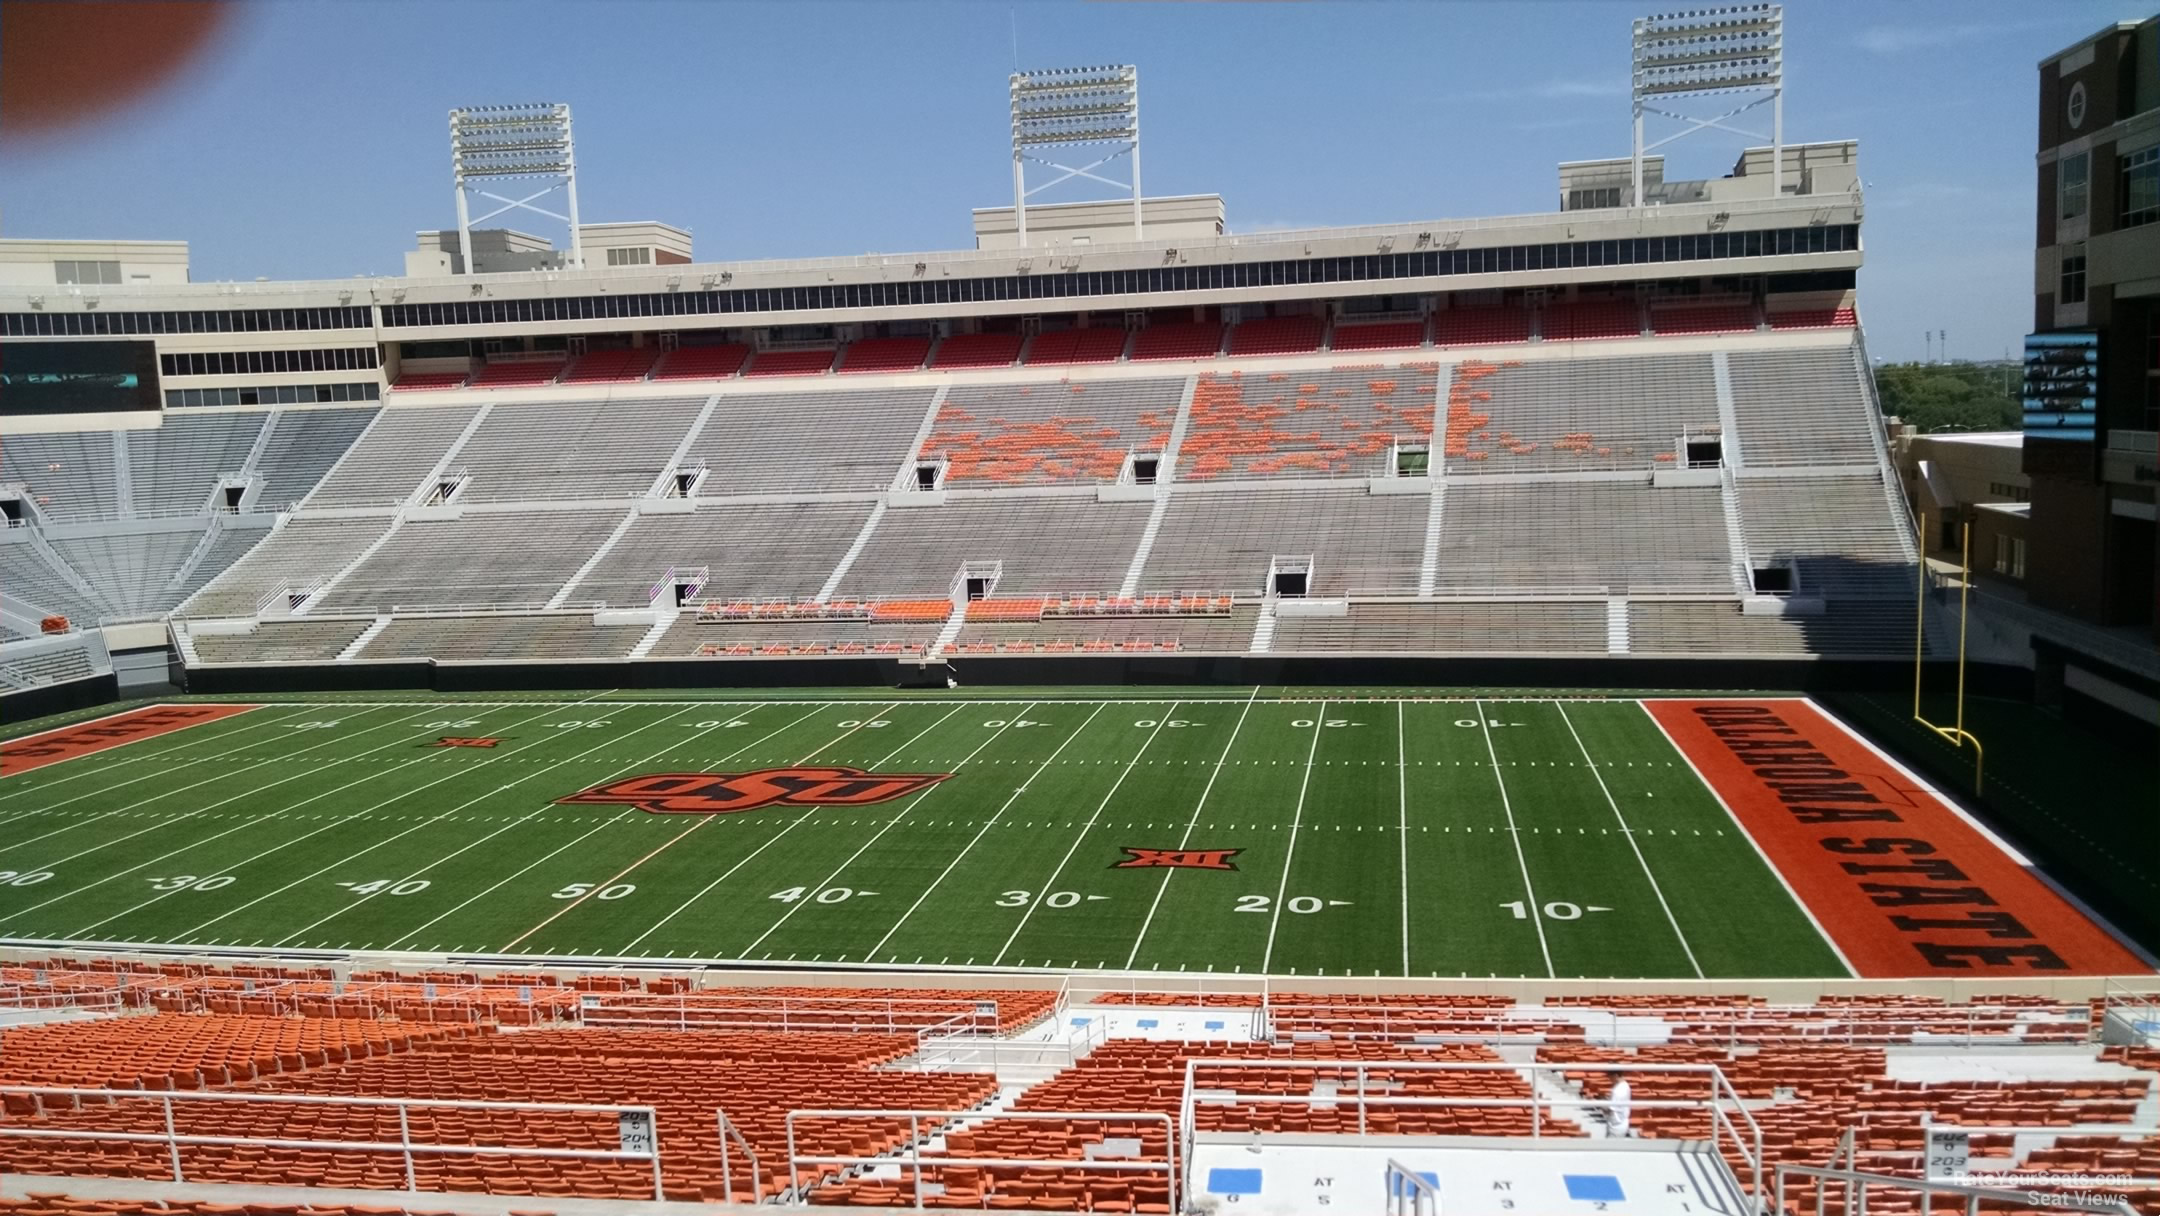 section 303, row 19 seat view  - boone pickens stadium